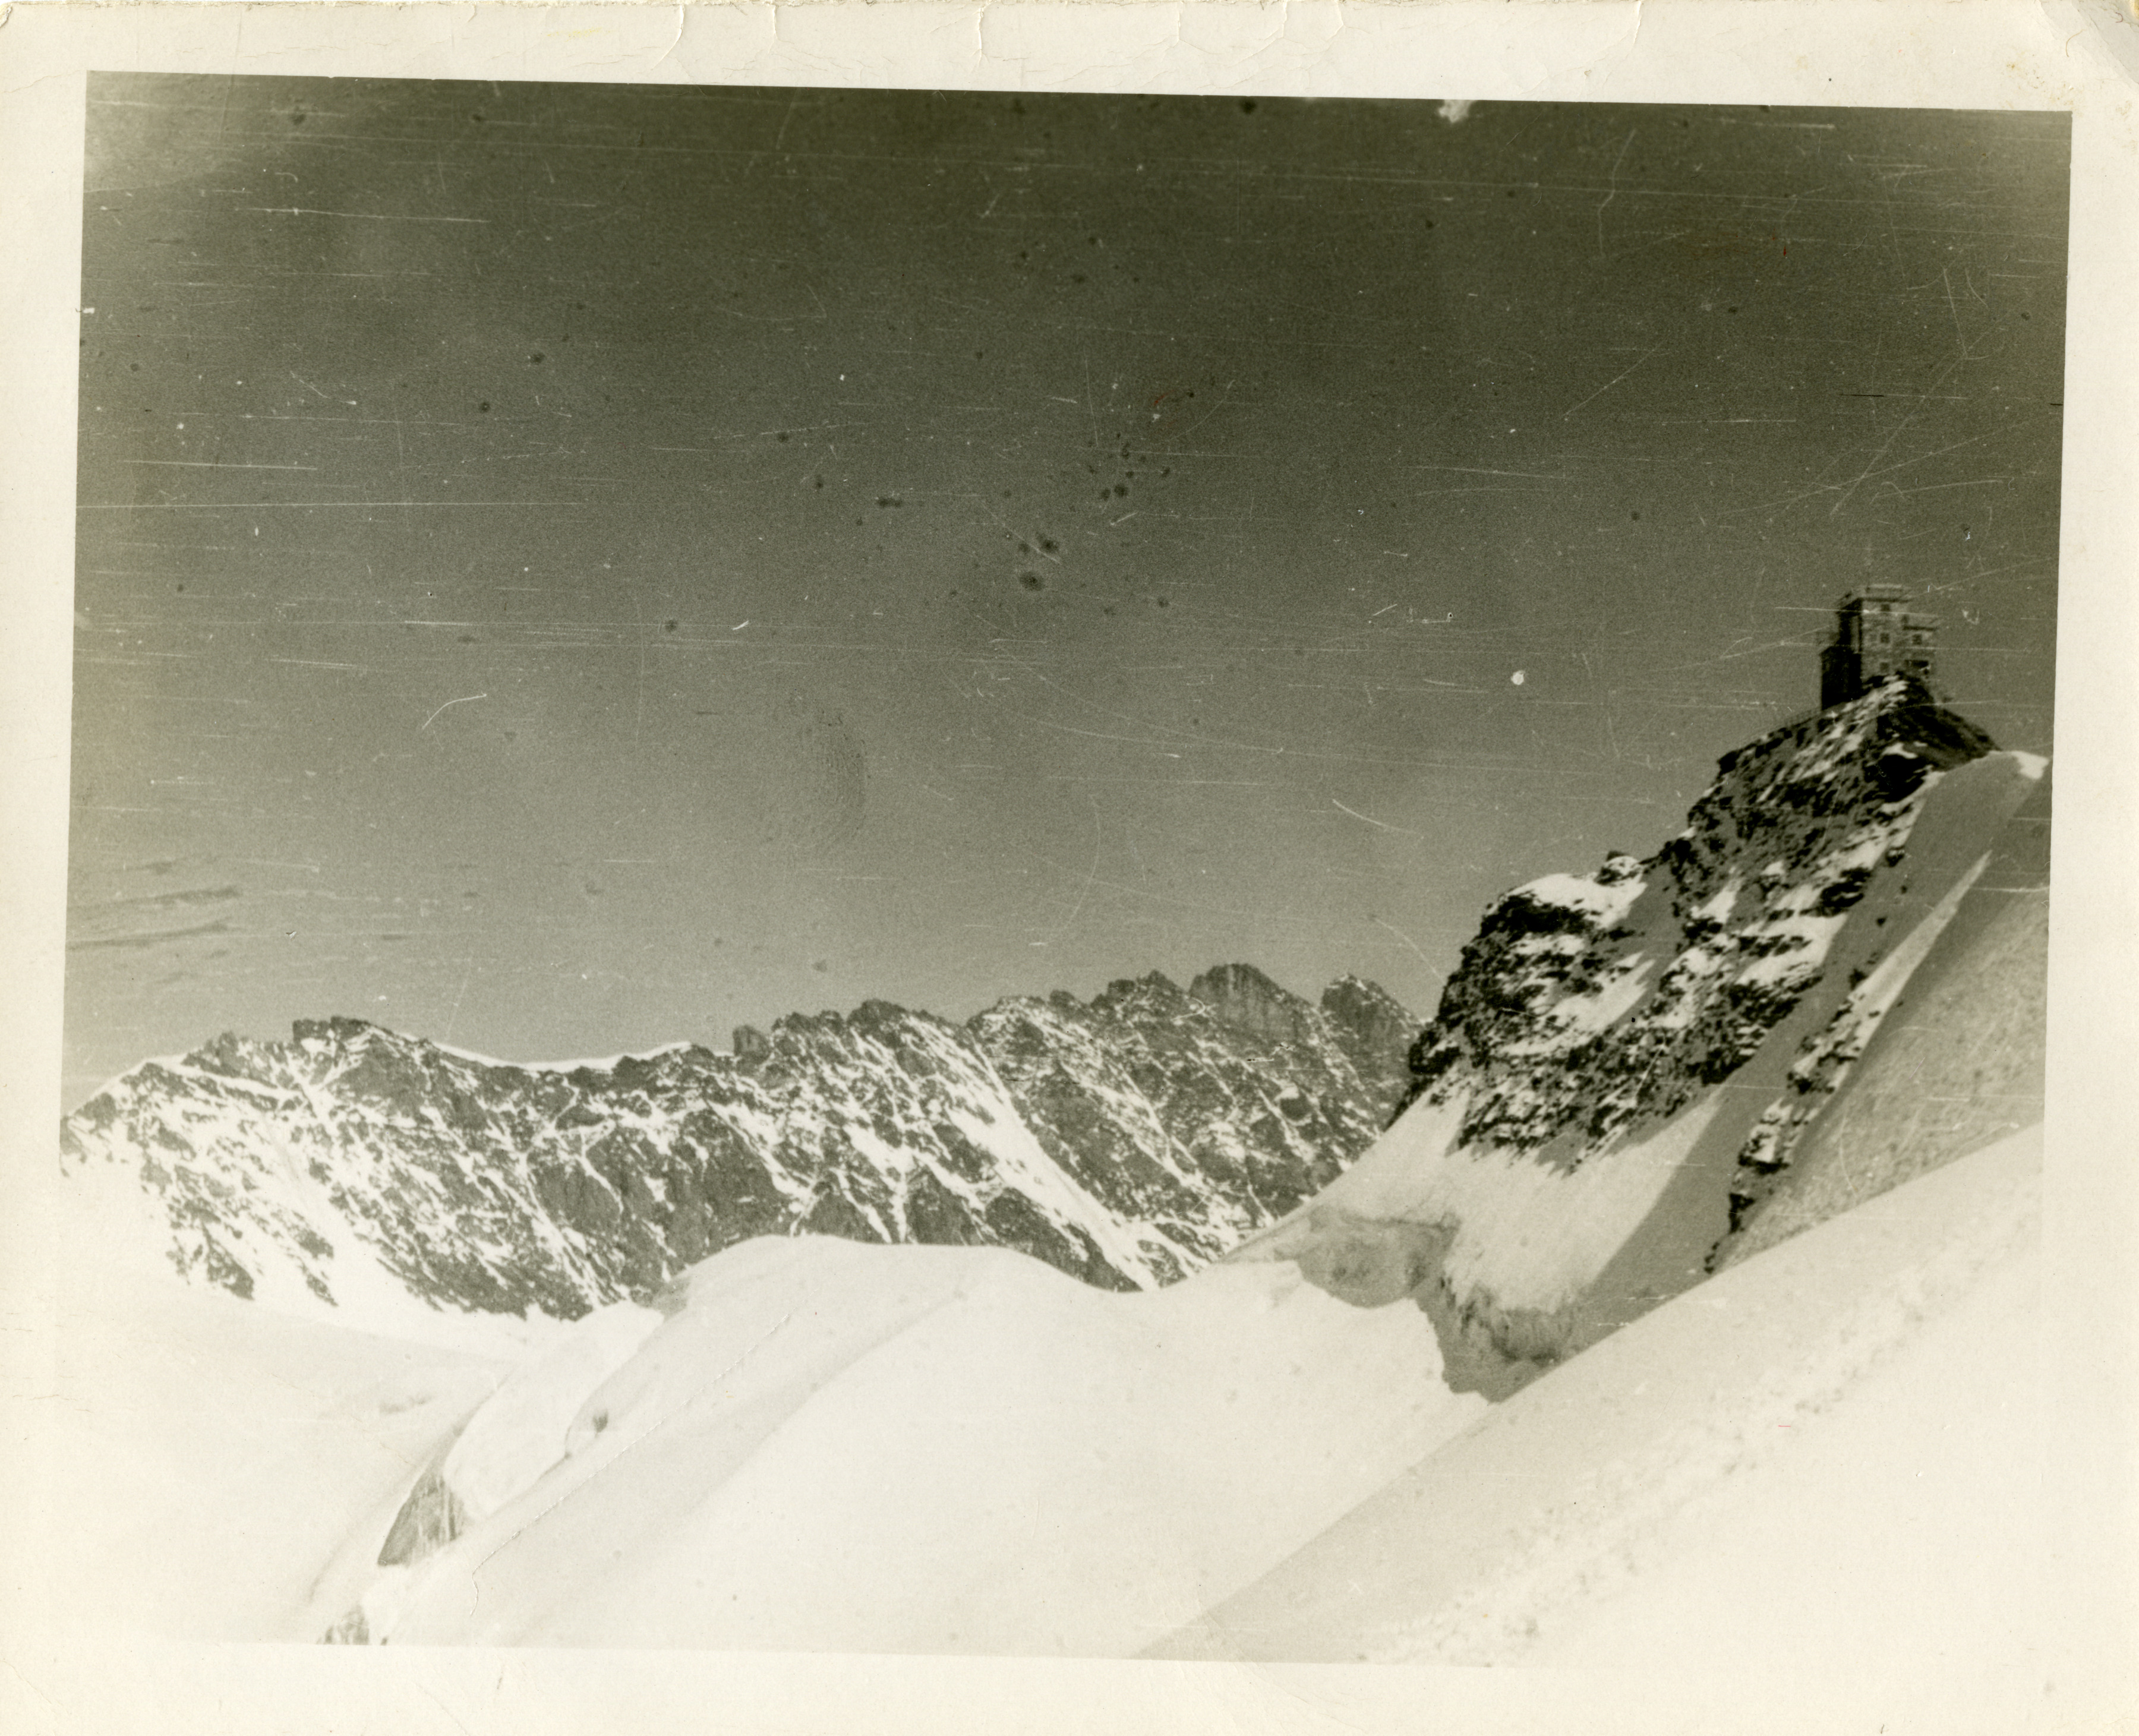 Jungfrau mountain, Switzerland | The Digital Collections of the ...